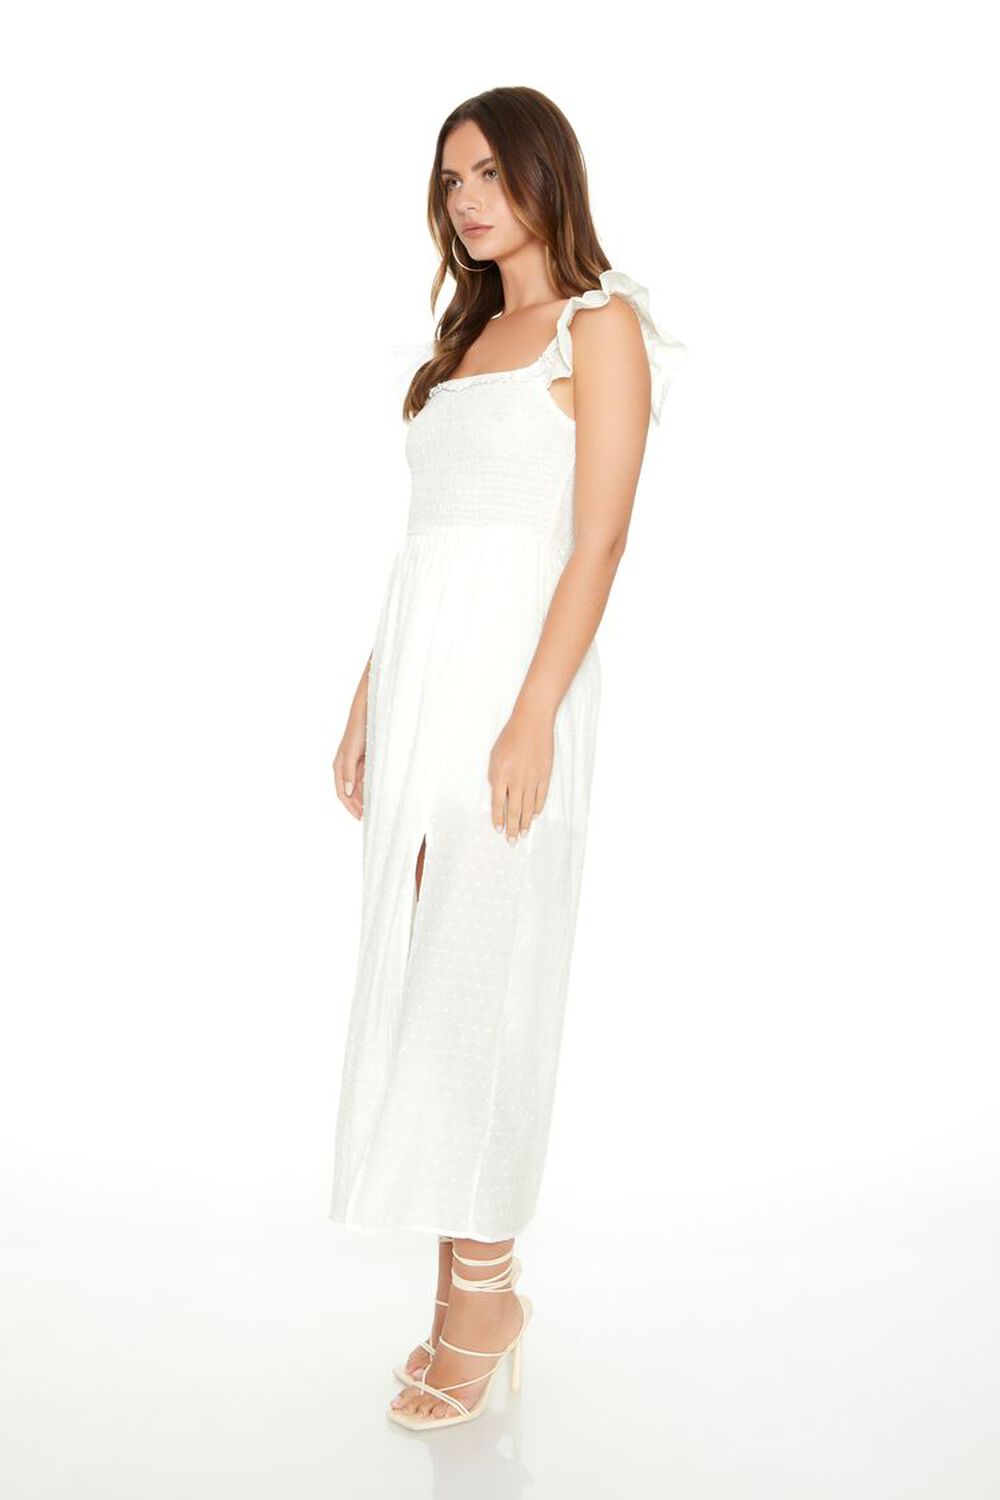 WHITE Butterfly-Sleeve Maxi Dress, image 2